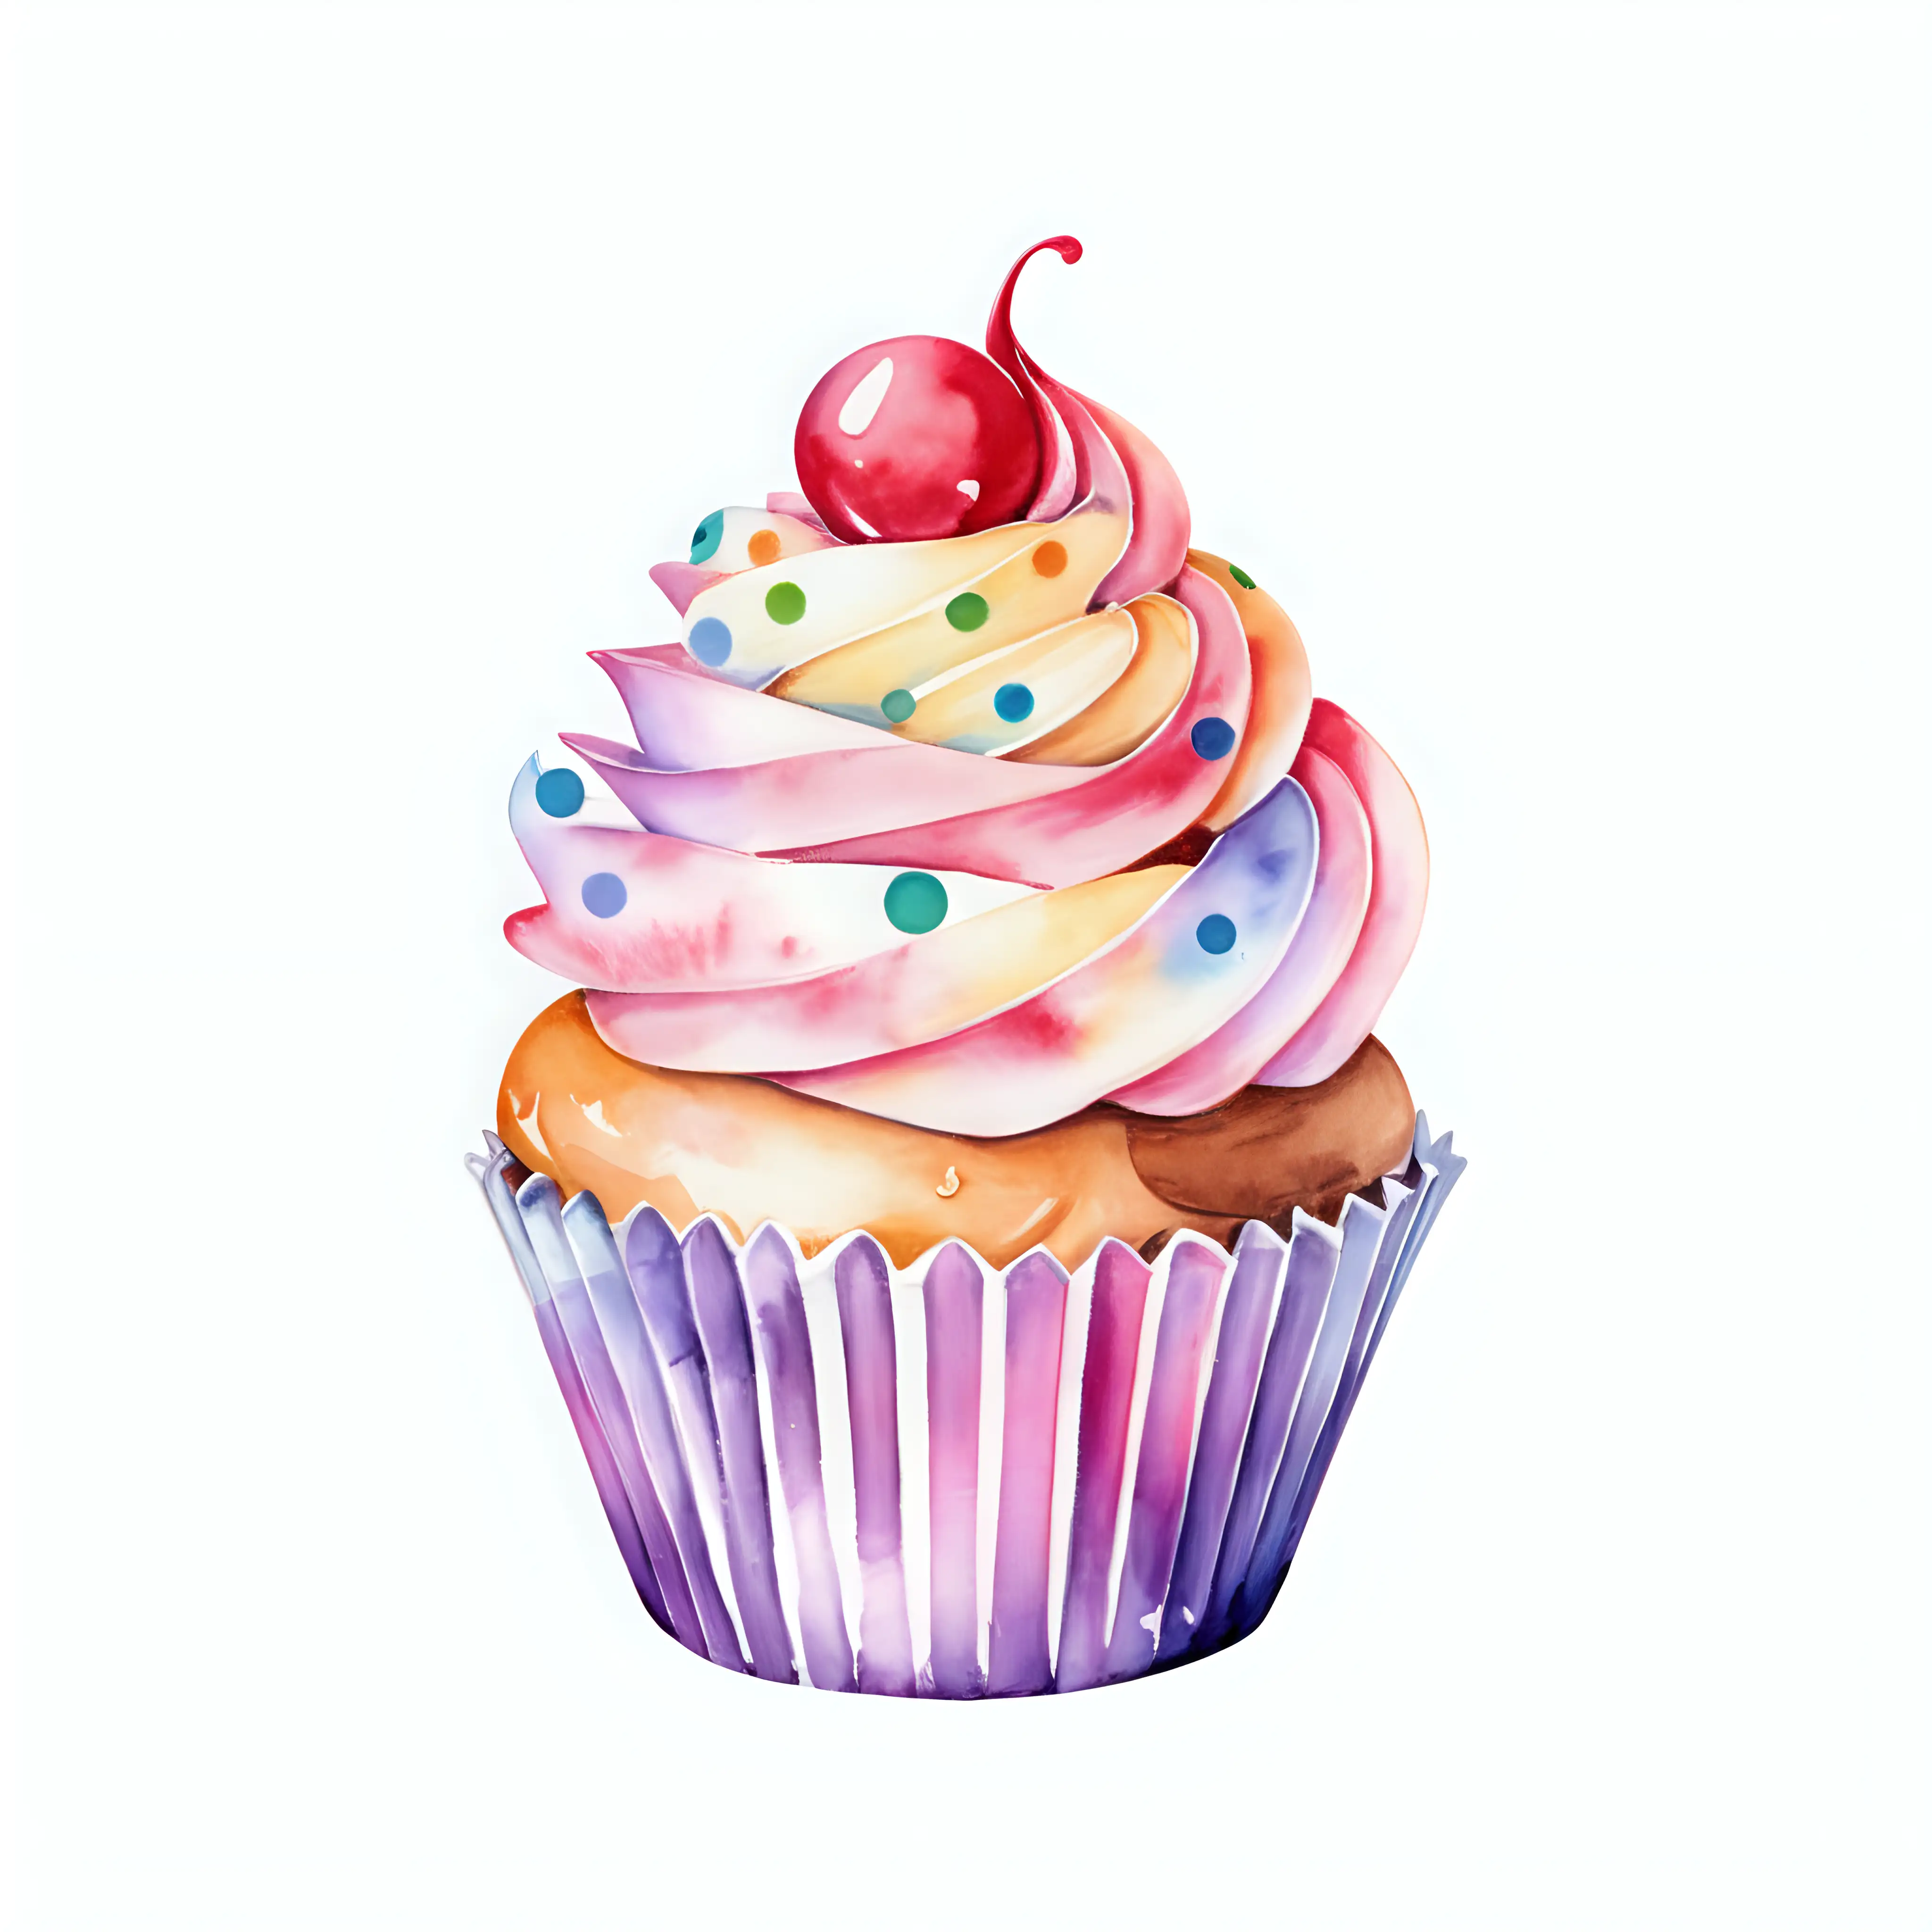 Watercolor styled, single, colored cupcake with circles, with no background